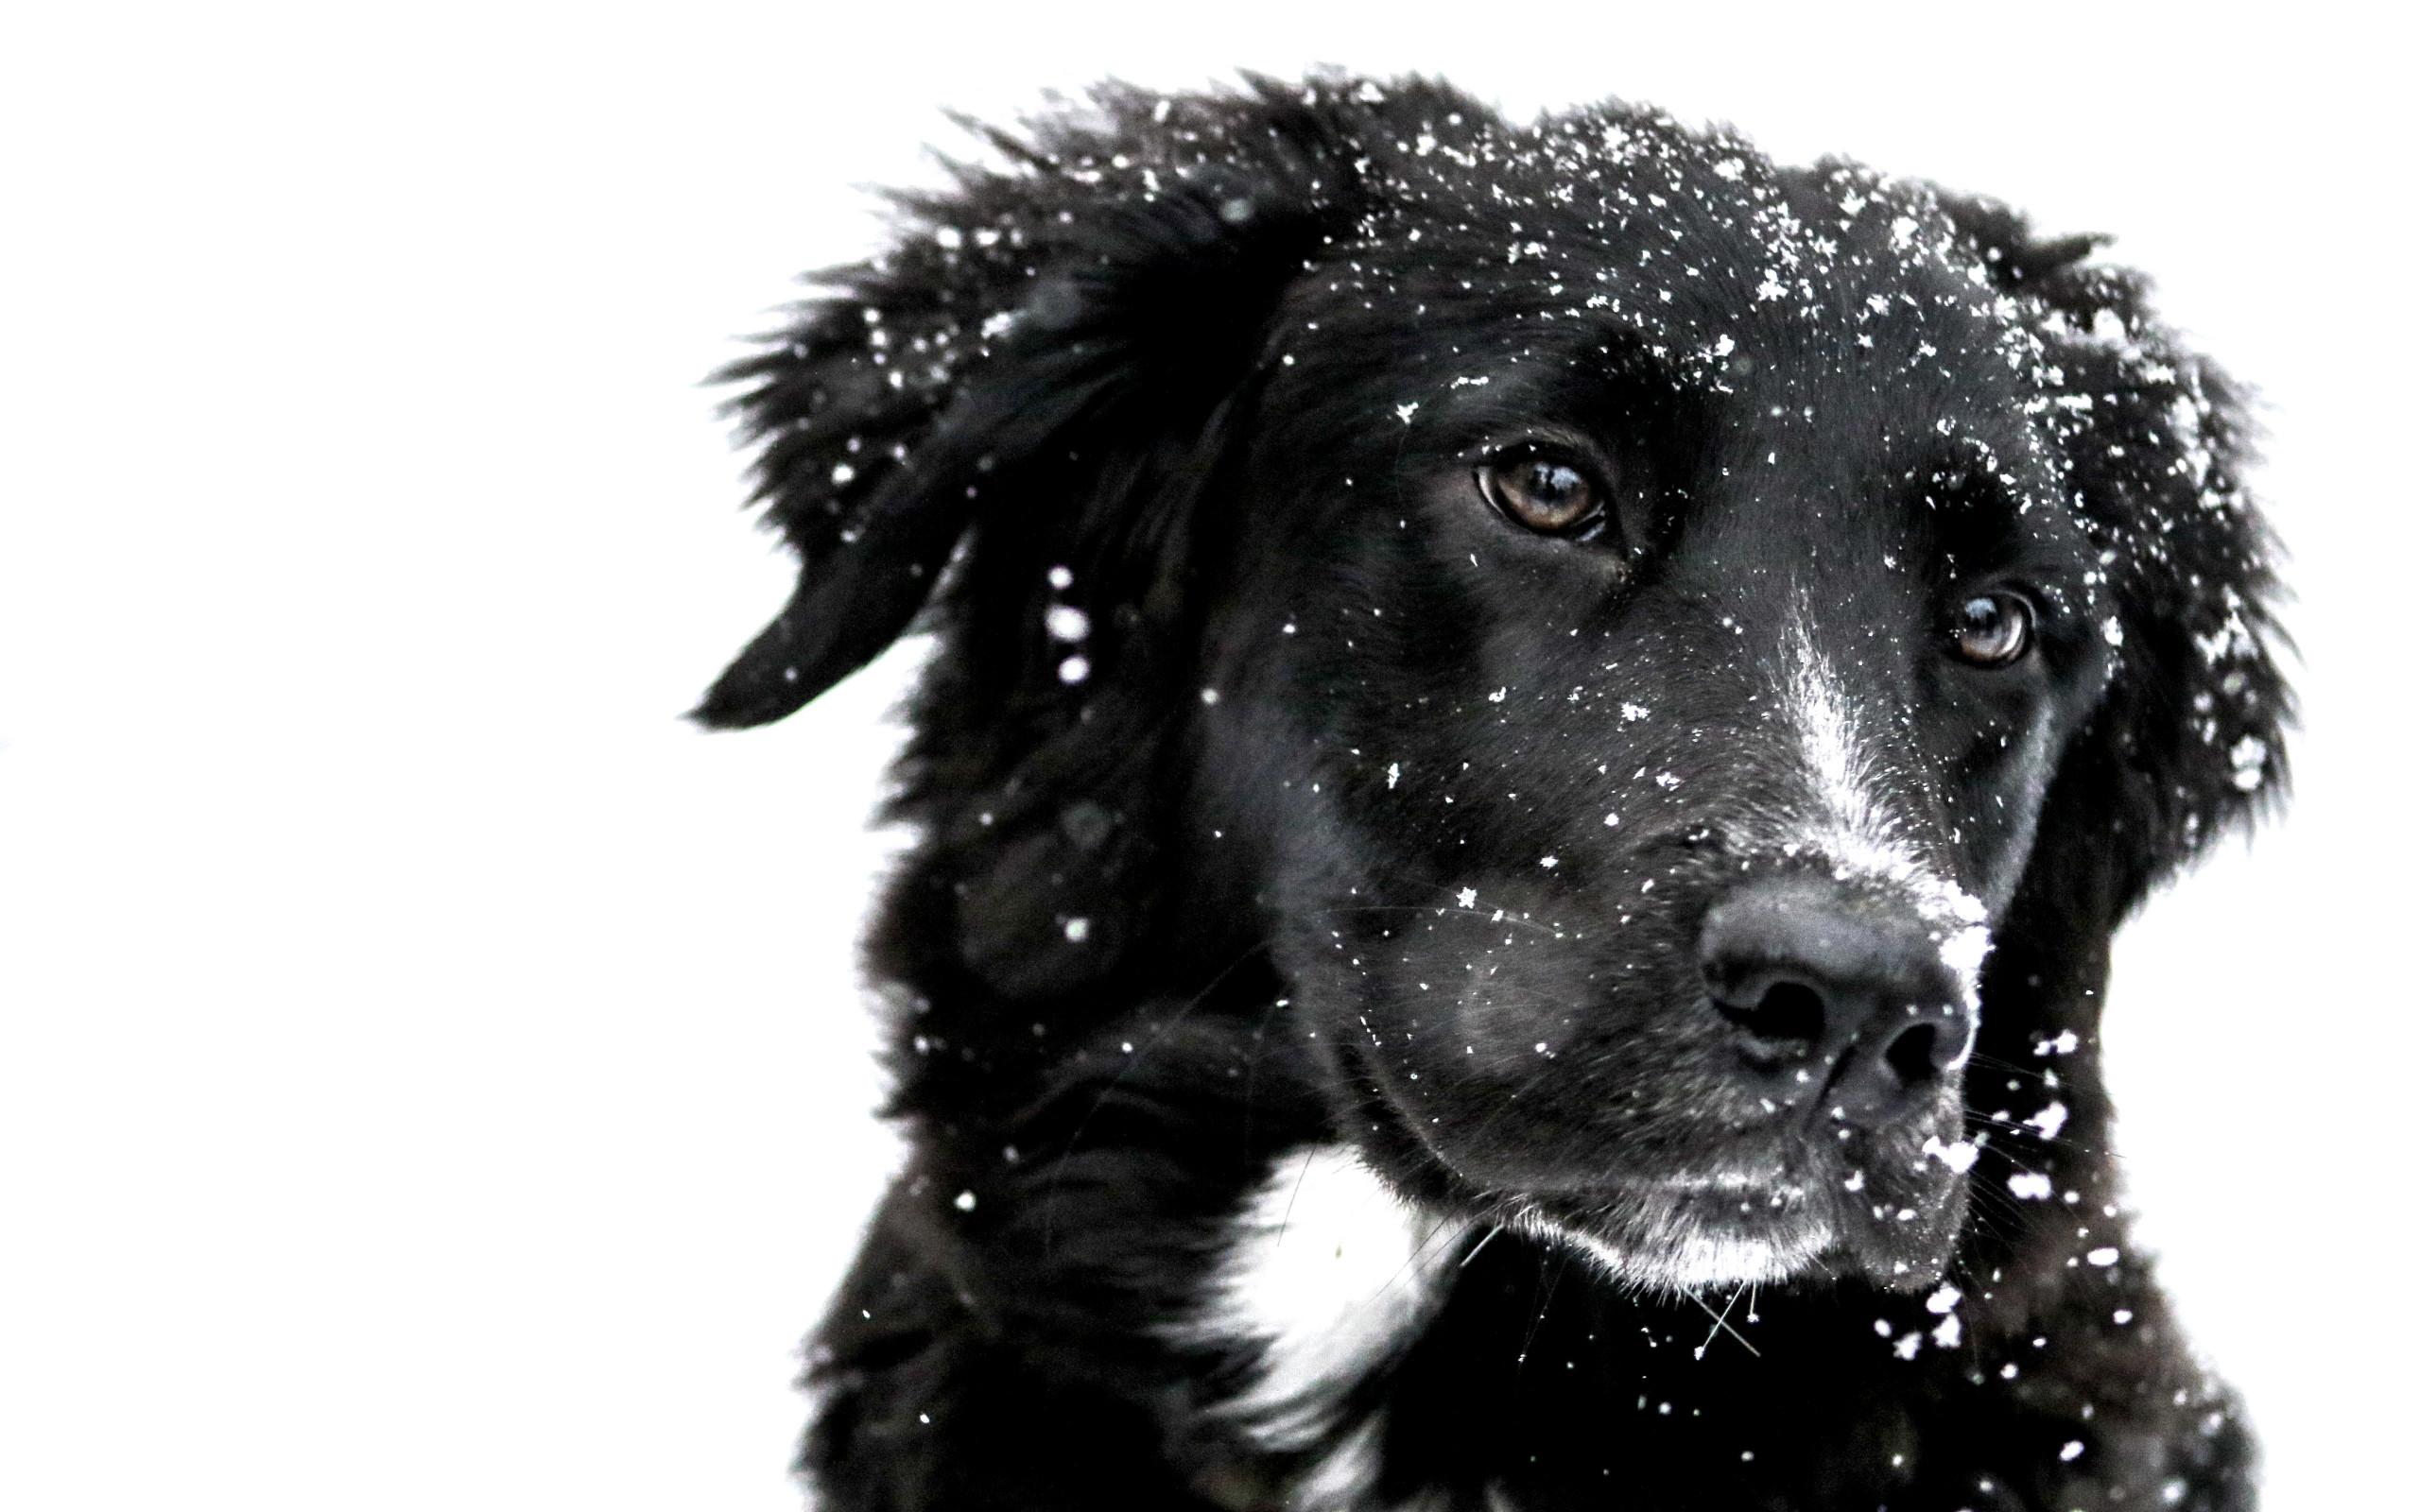 Snowing over the cute dog wallpaper 2560x1600